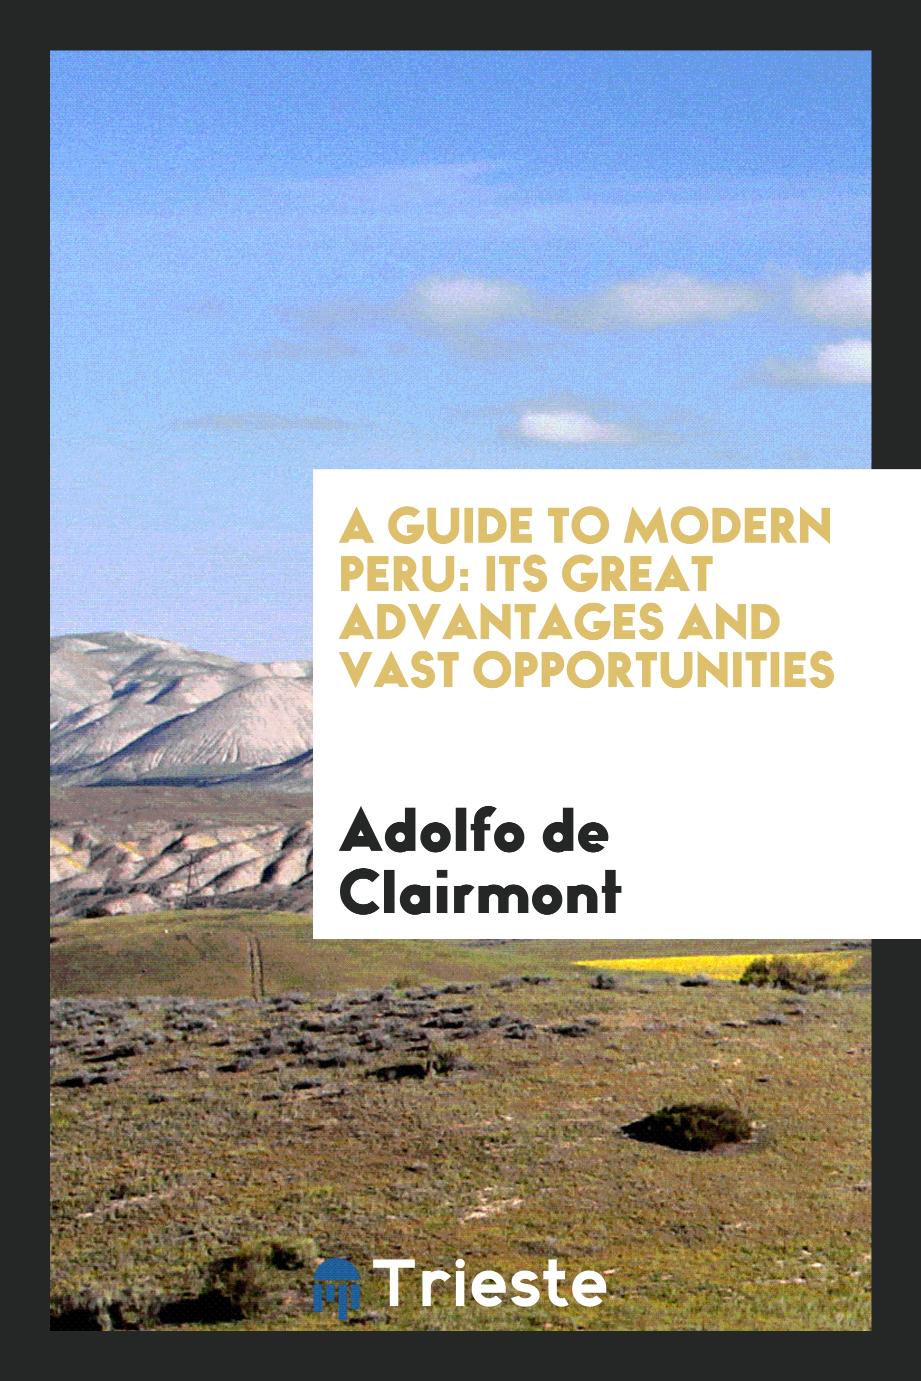 A guide to modern Peru: its great advantages and vast opportunities